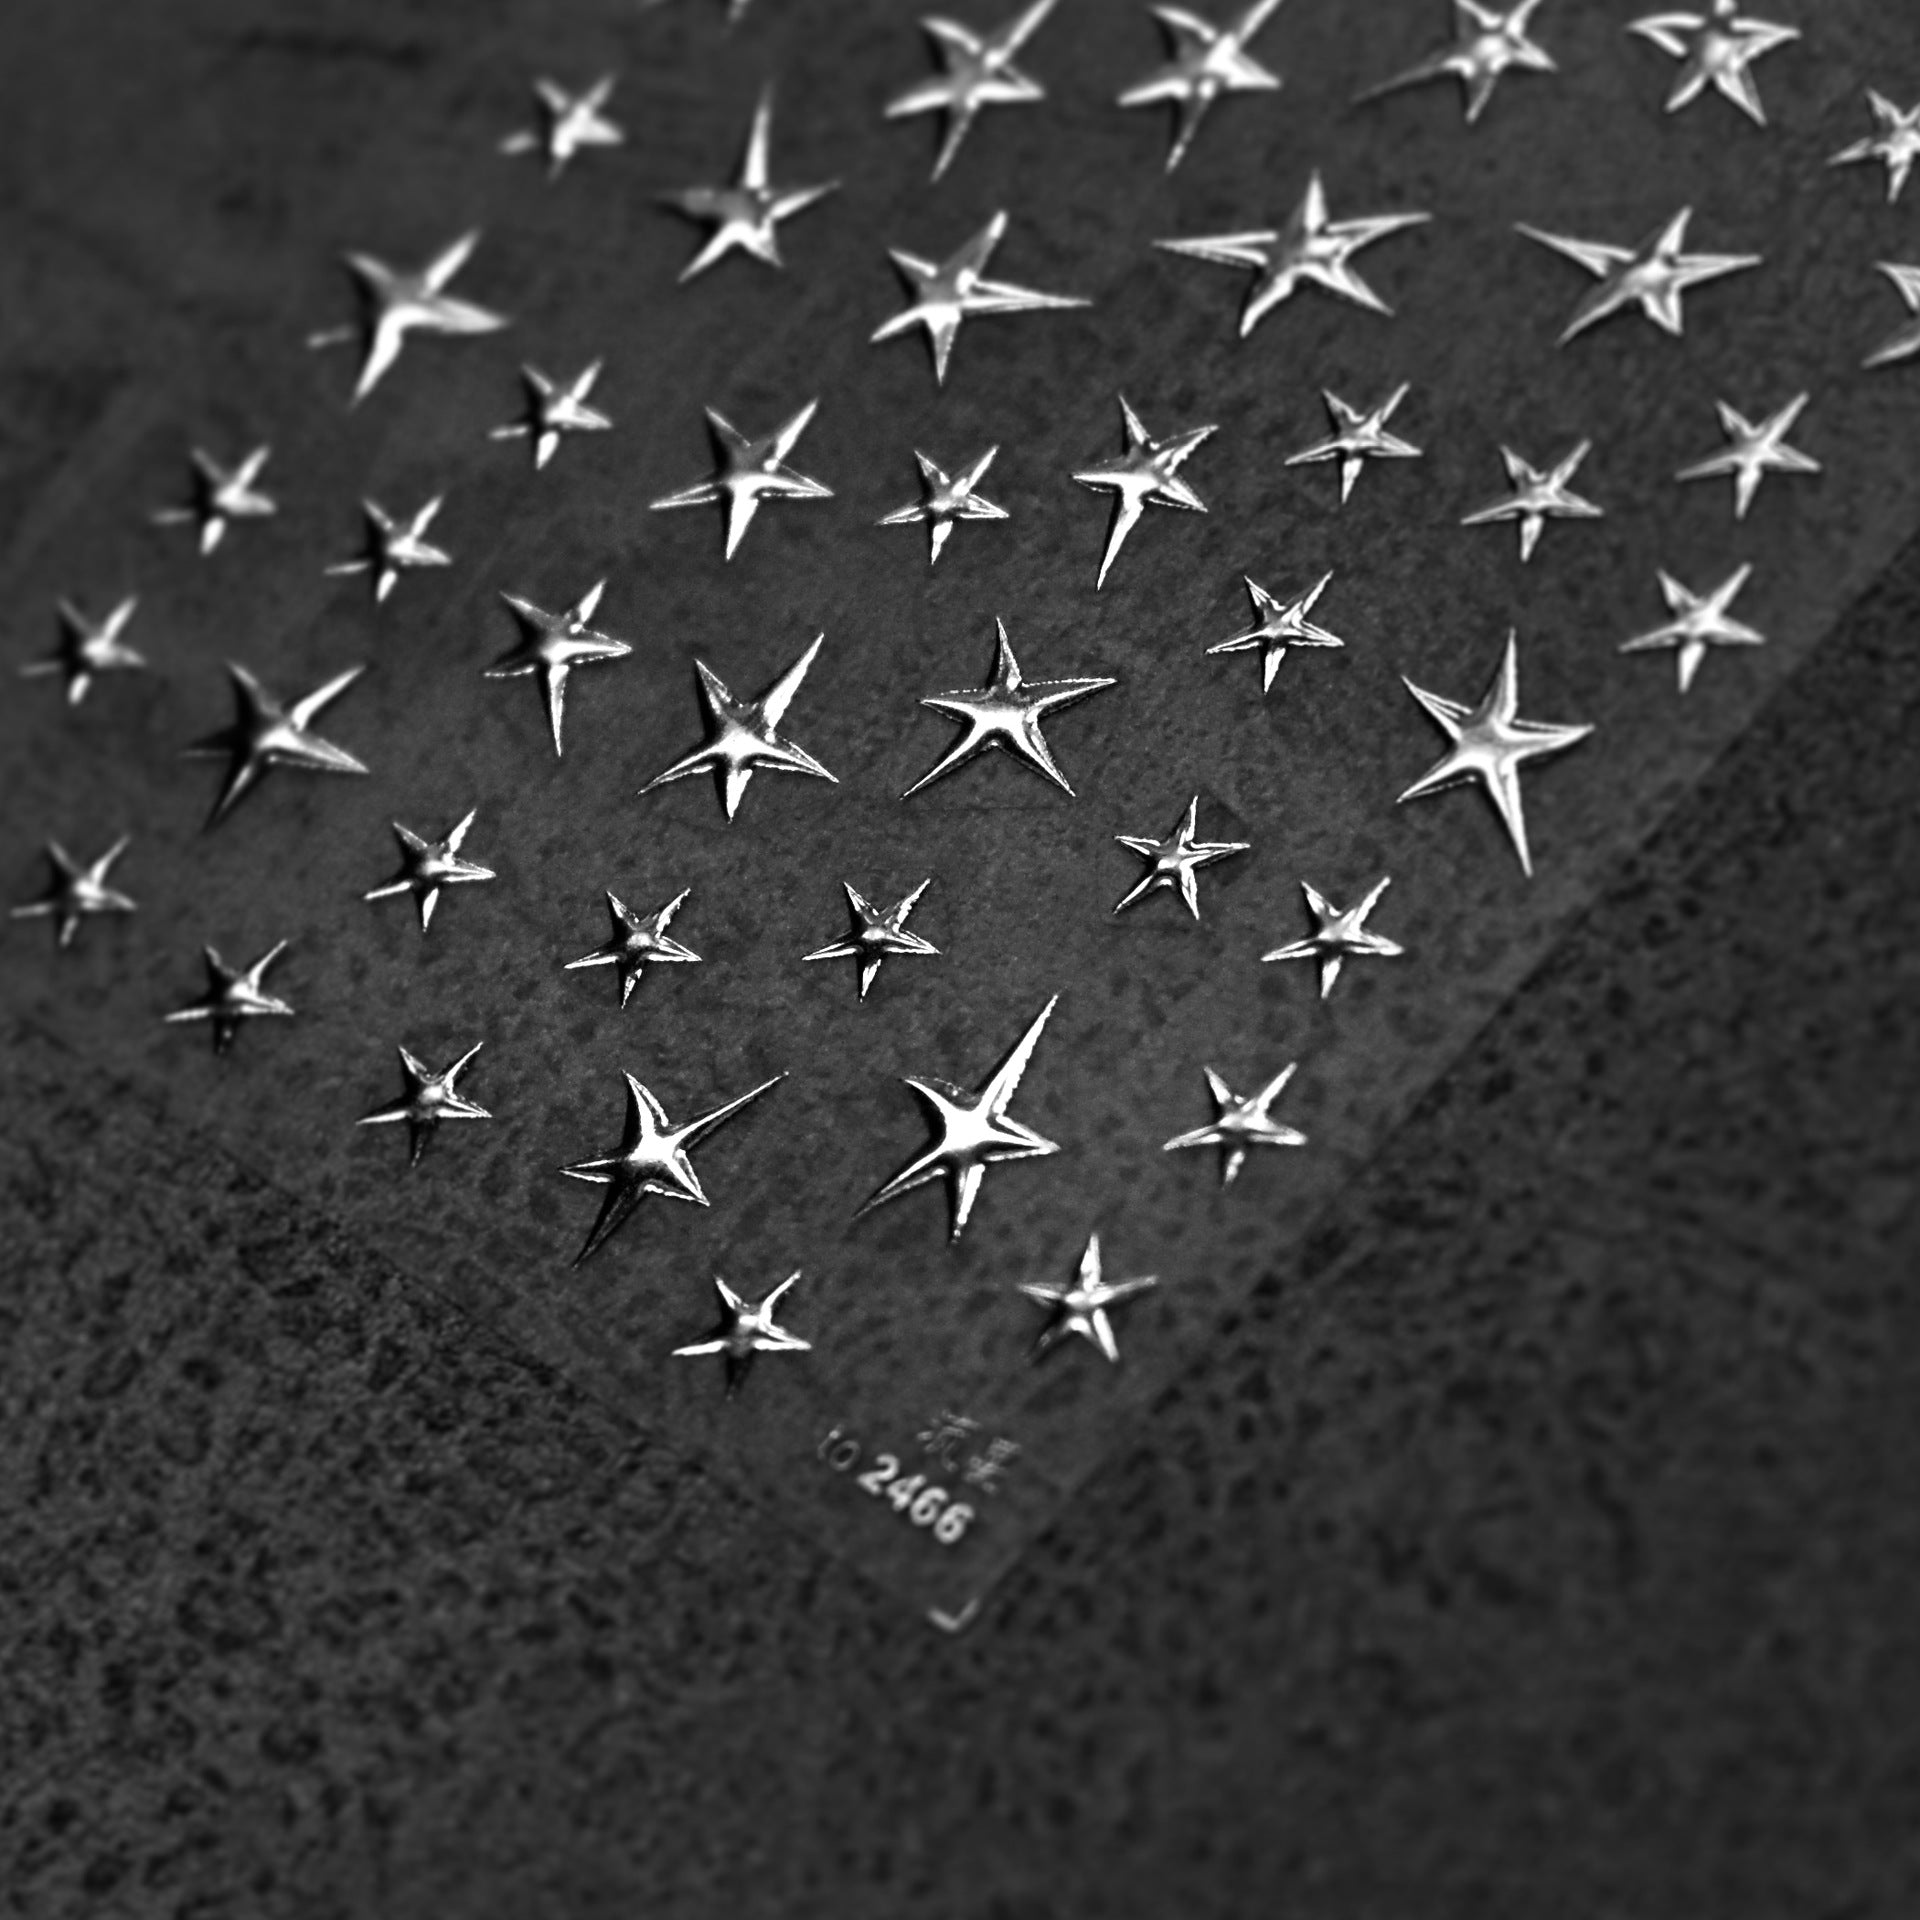 NailMAD Nail Art Stickers Adhesive Star Embossed Sticker Decals Metal Color Self-Adhesive DIY Manicure Accessories to2246